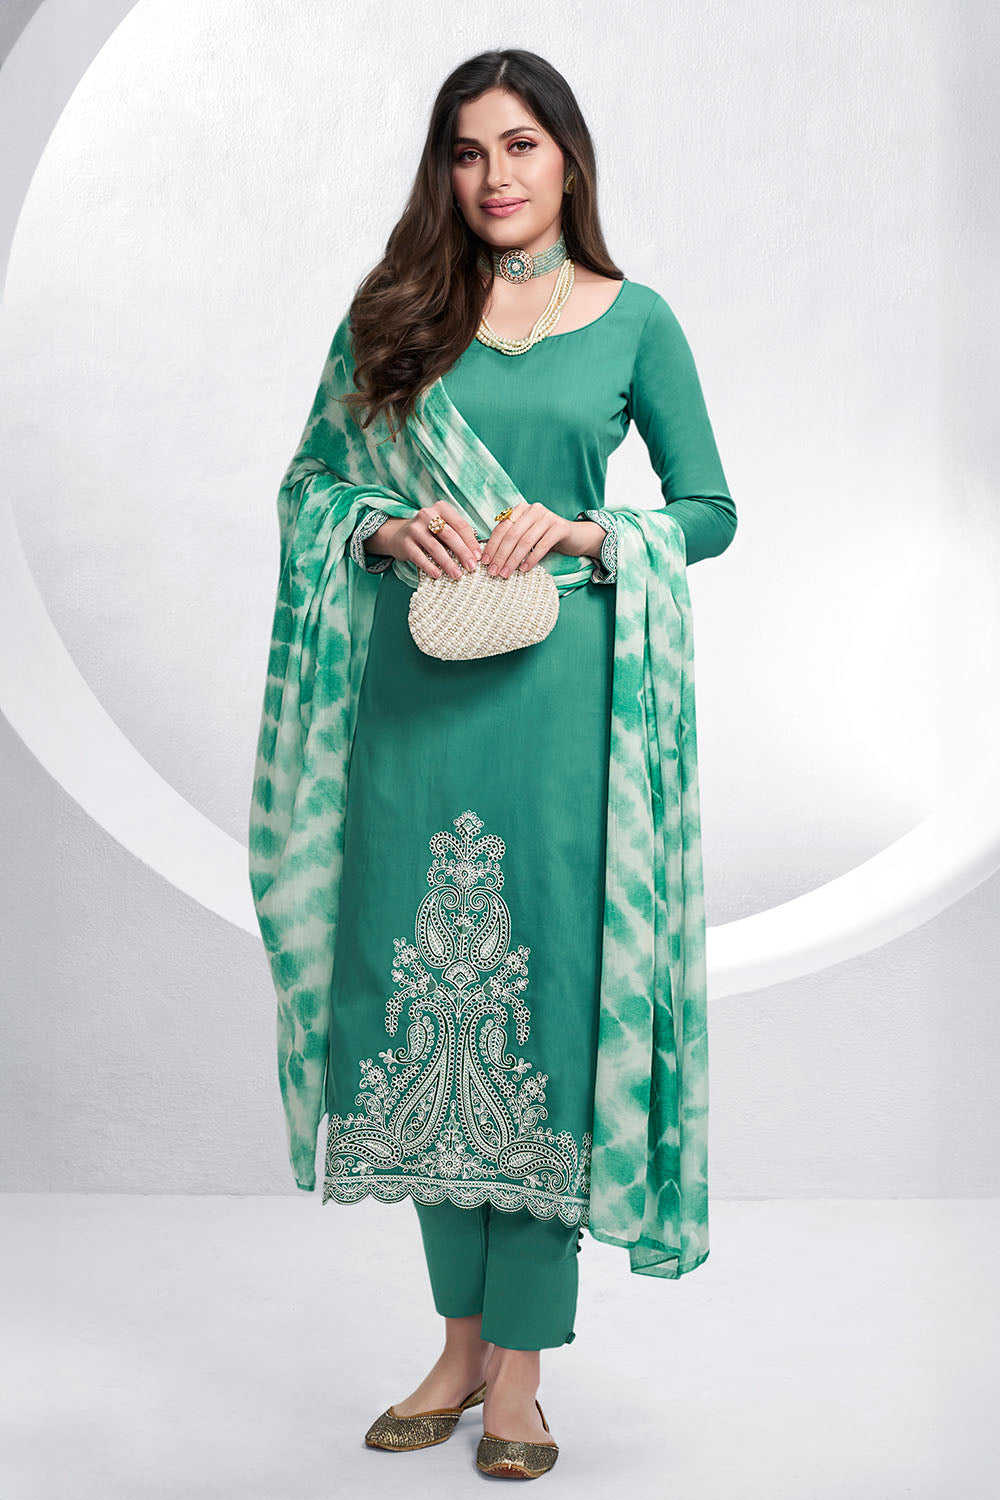 Teal Color Cotton Hemline Embroidered Unstitched Suit Material